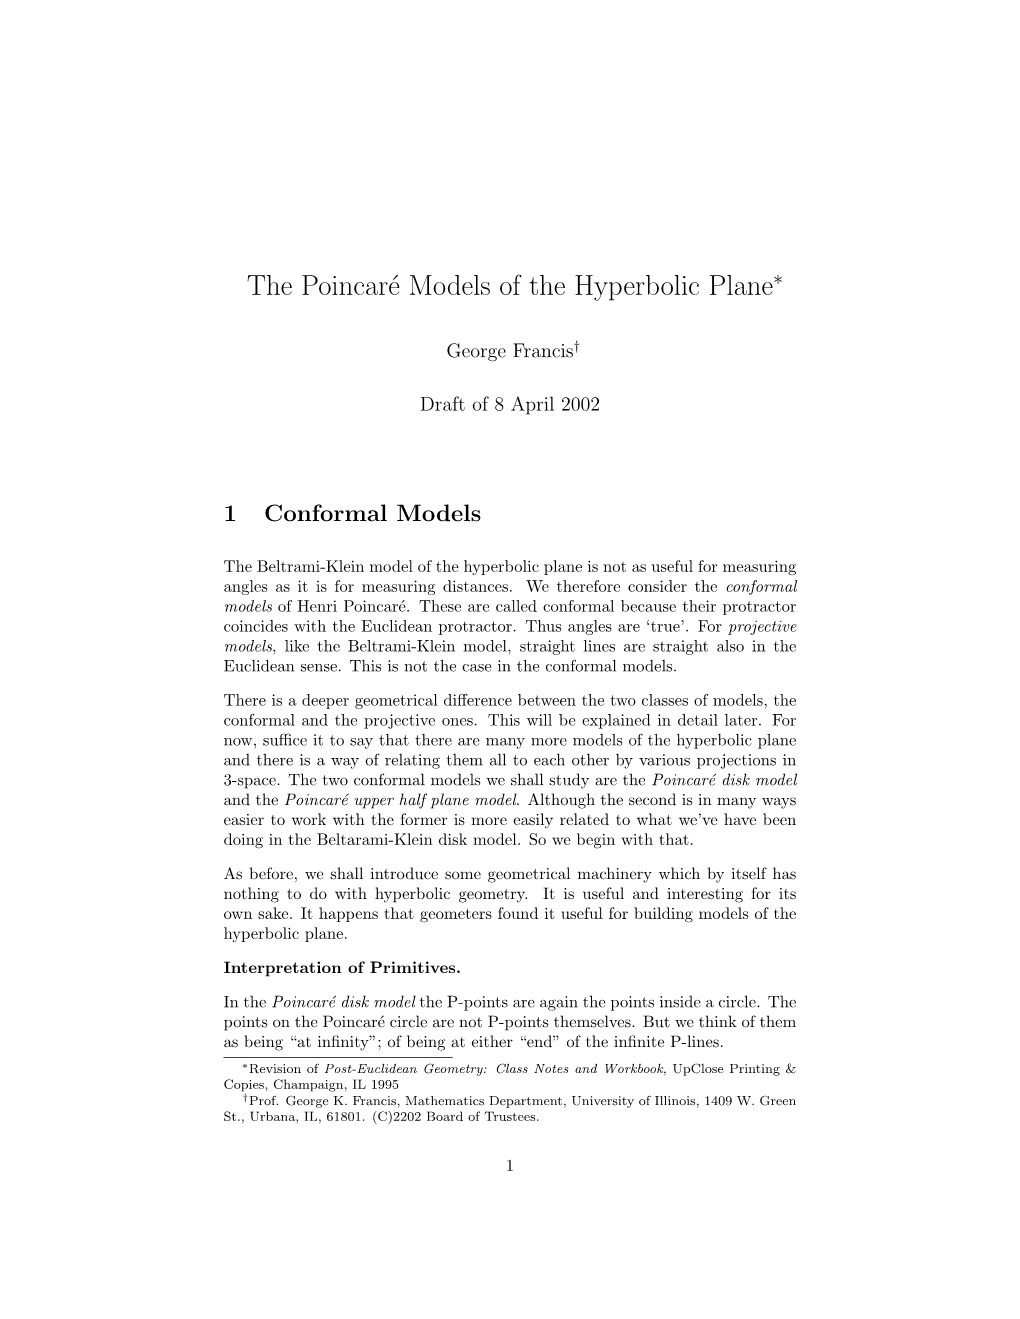 The Poincaré Models of the Hyperbolic Plane